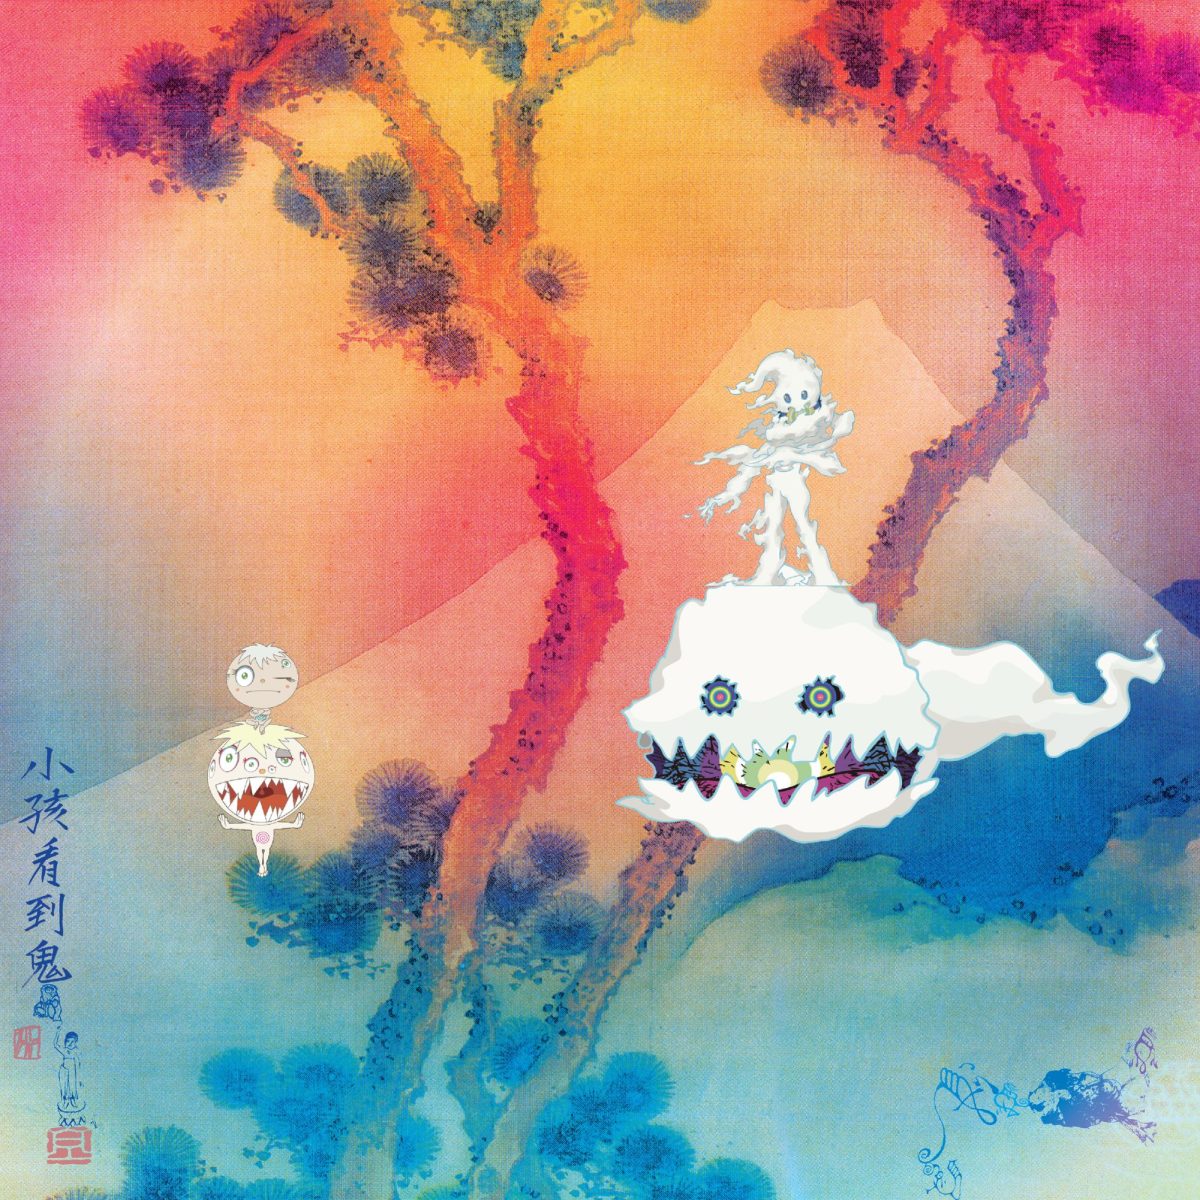 The album art for Kids See Ghosts.